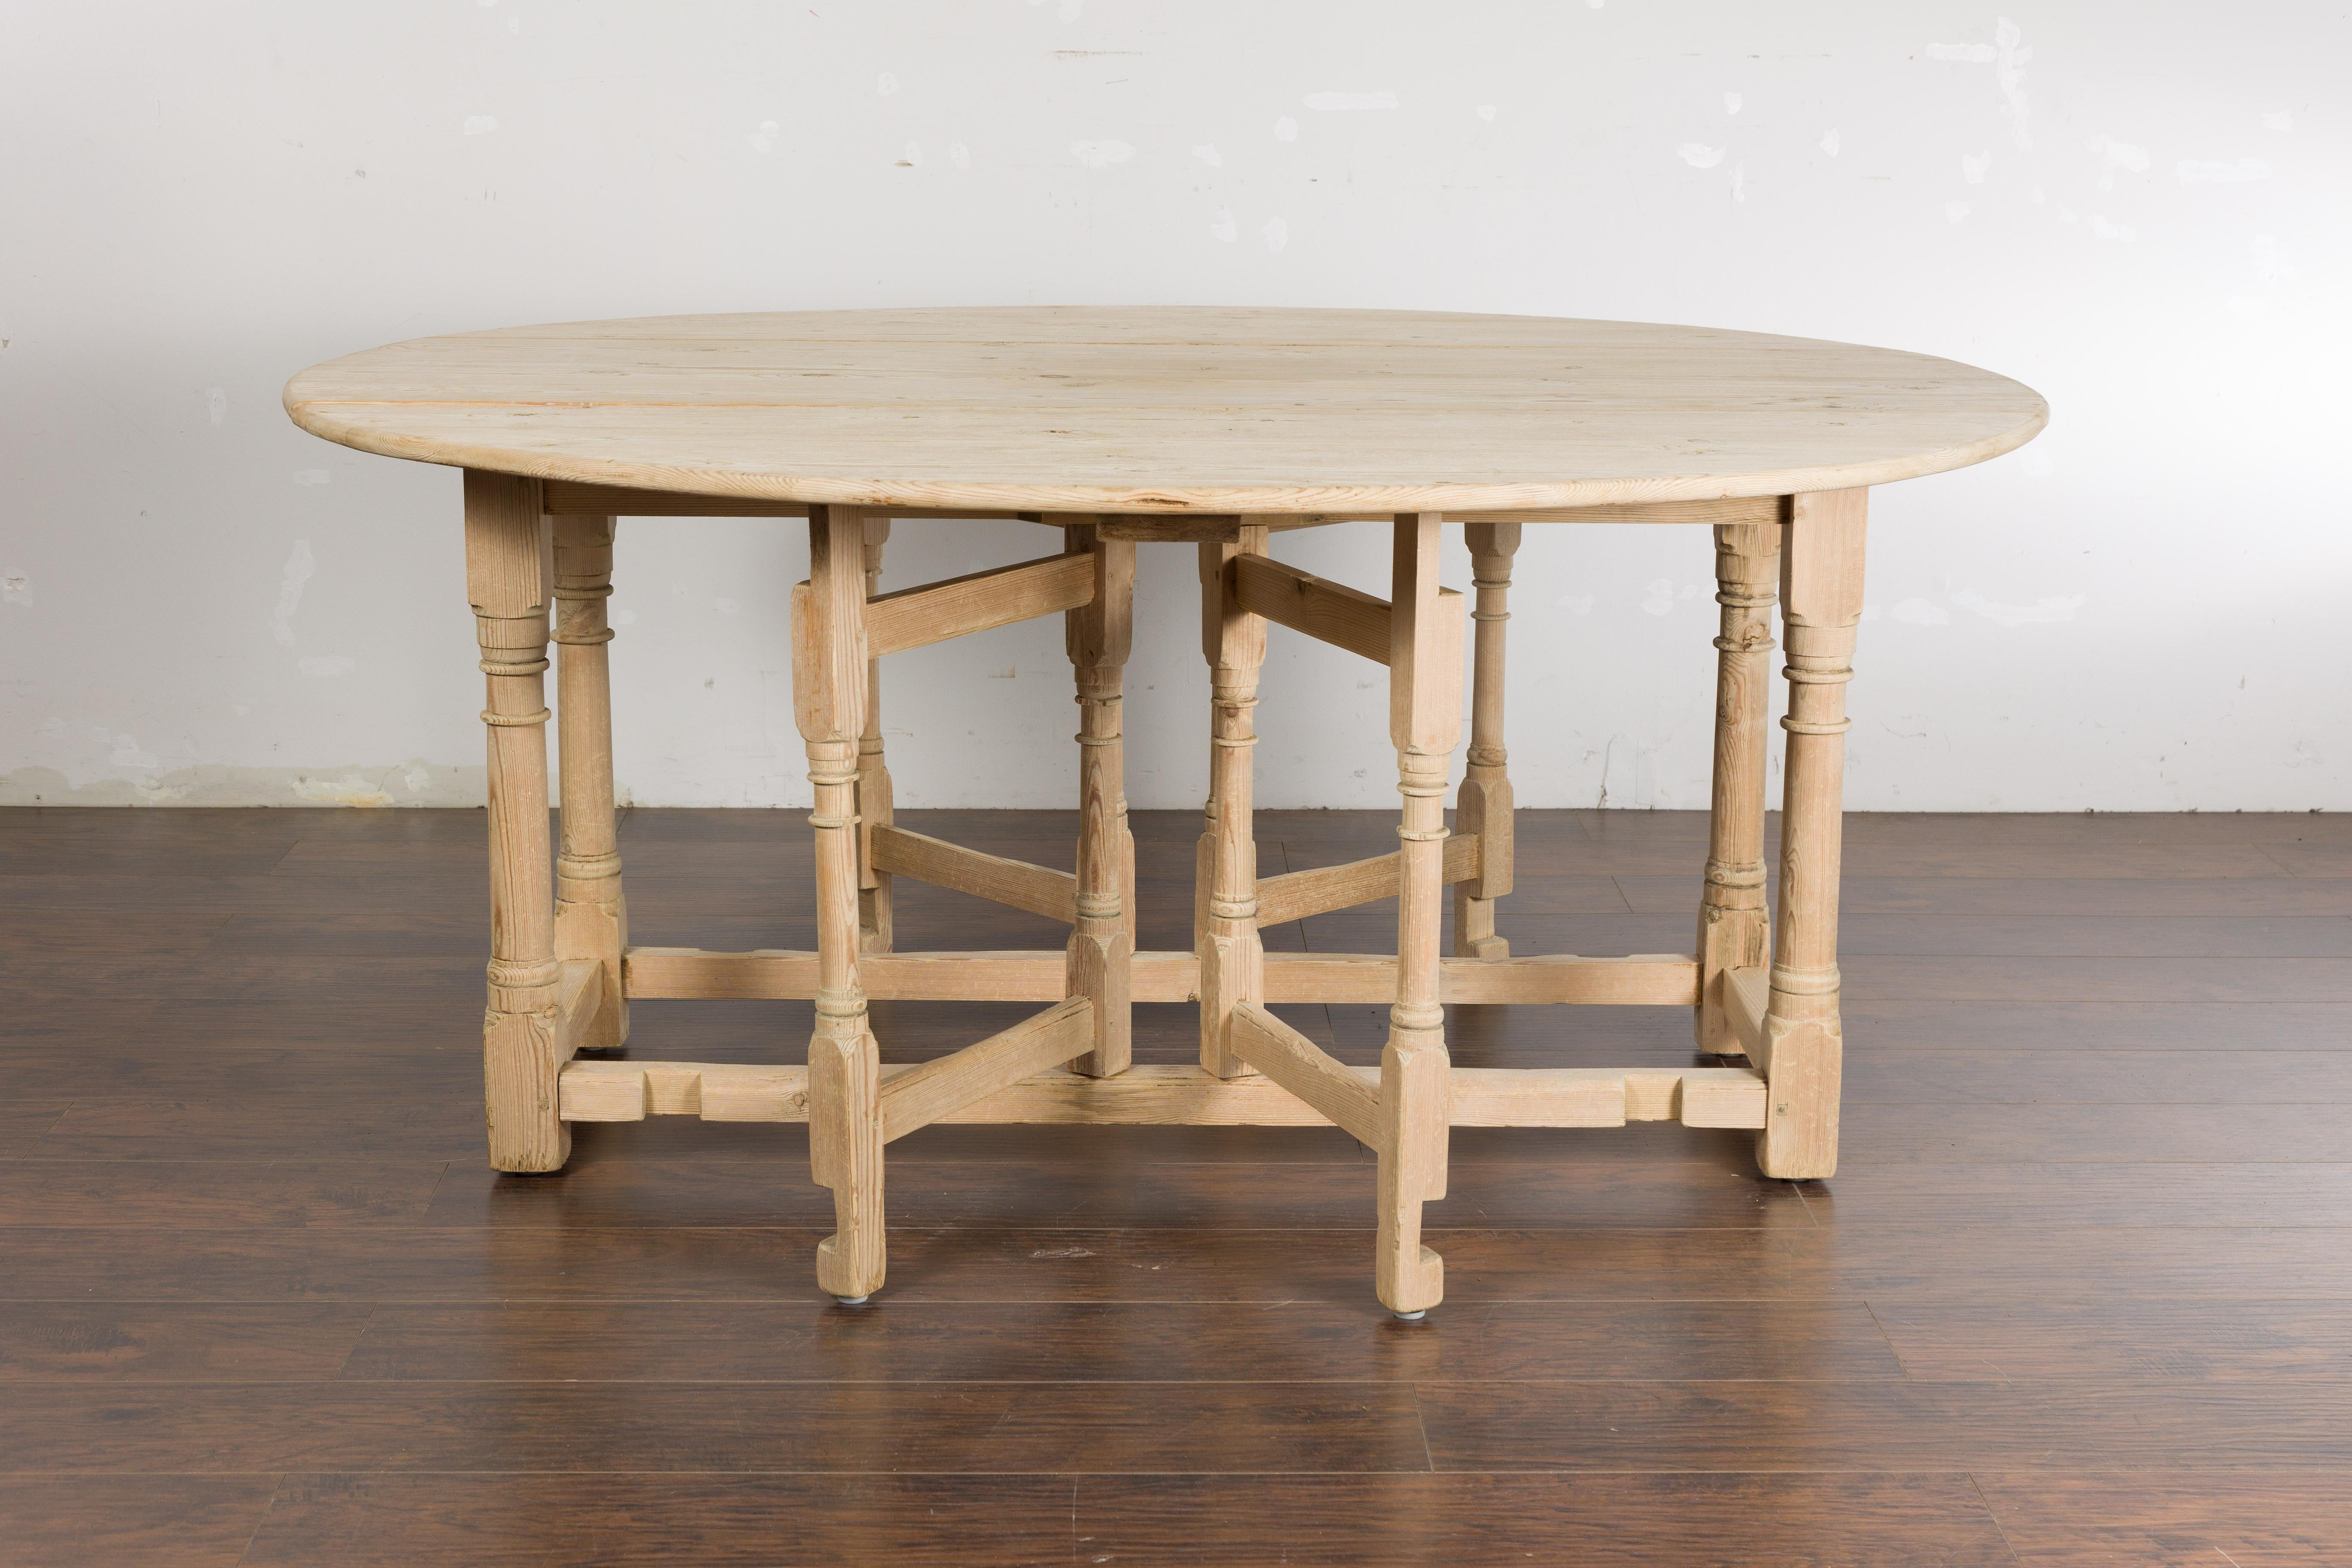 Rustic English 19th Century Pine Drop Leaf Round Top Table with Turned Legs For Sale 3